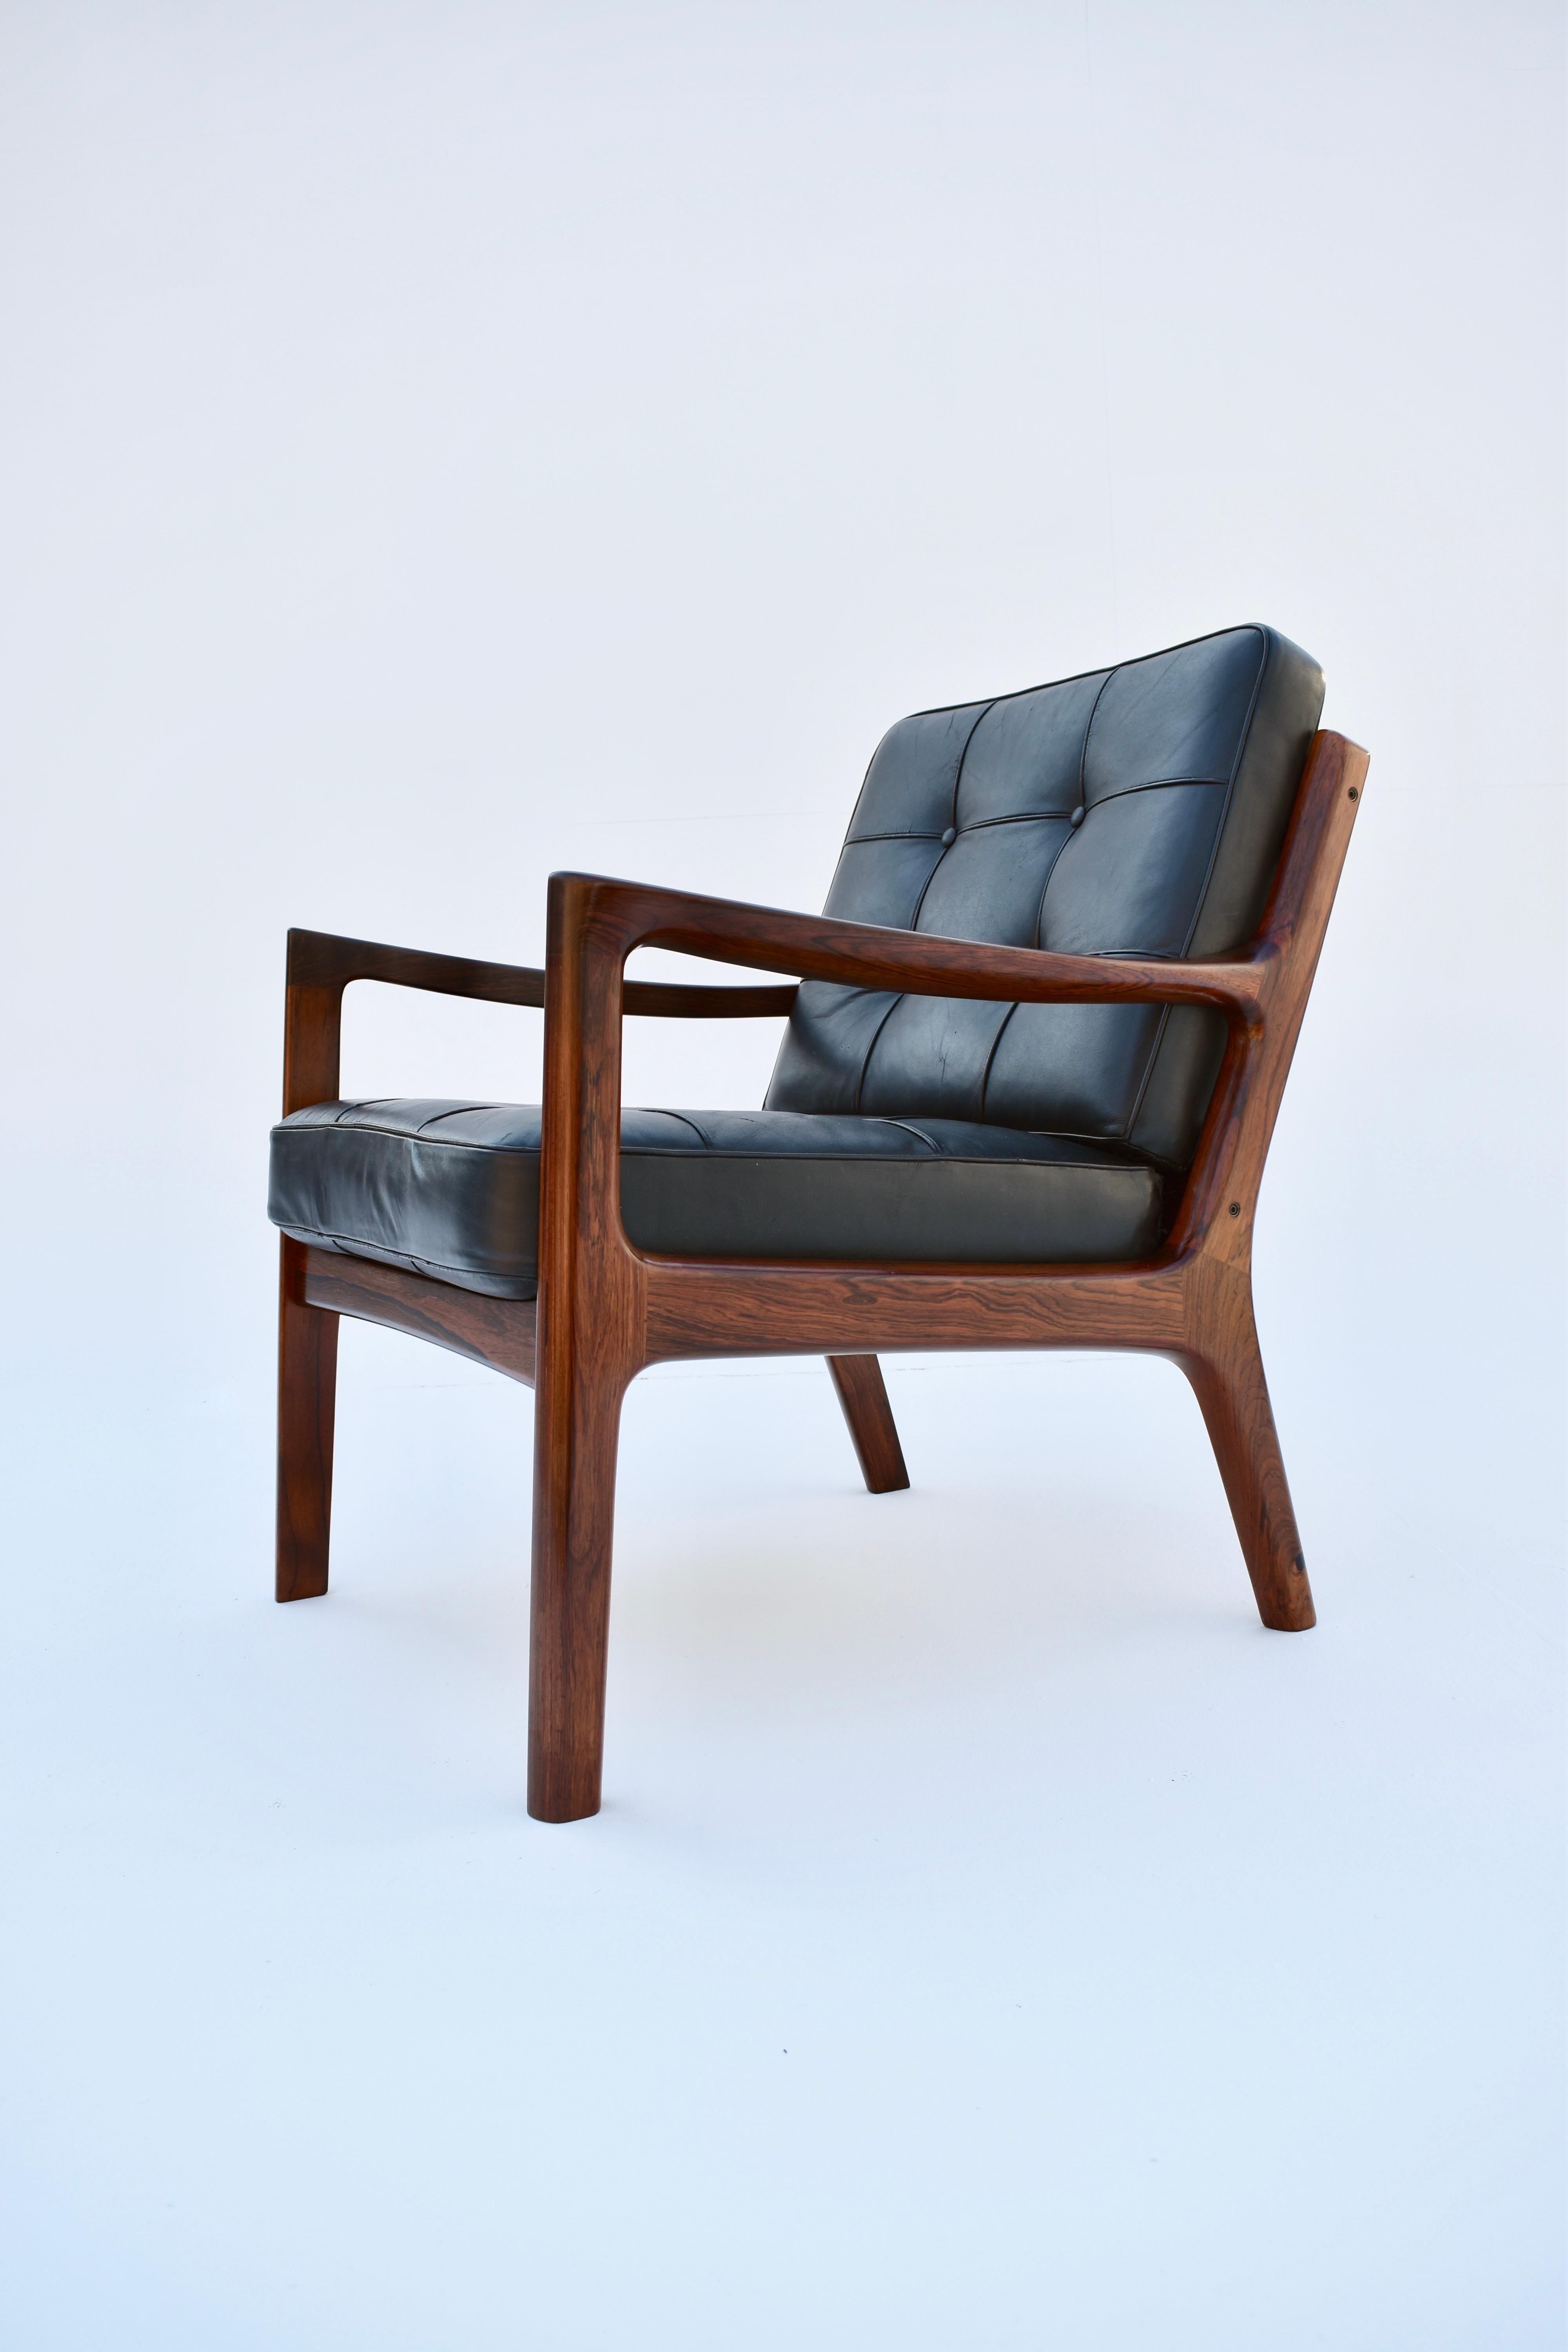 Beautiful Model 166 ‘Senator’ chair designed by Ole Wanscher for France & Son, Denmark.

Produced from solid Brazilian Rosewood this design looks absolutely stunning executed in this timber. Only a relatively small amount of chairs were produced